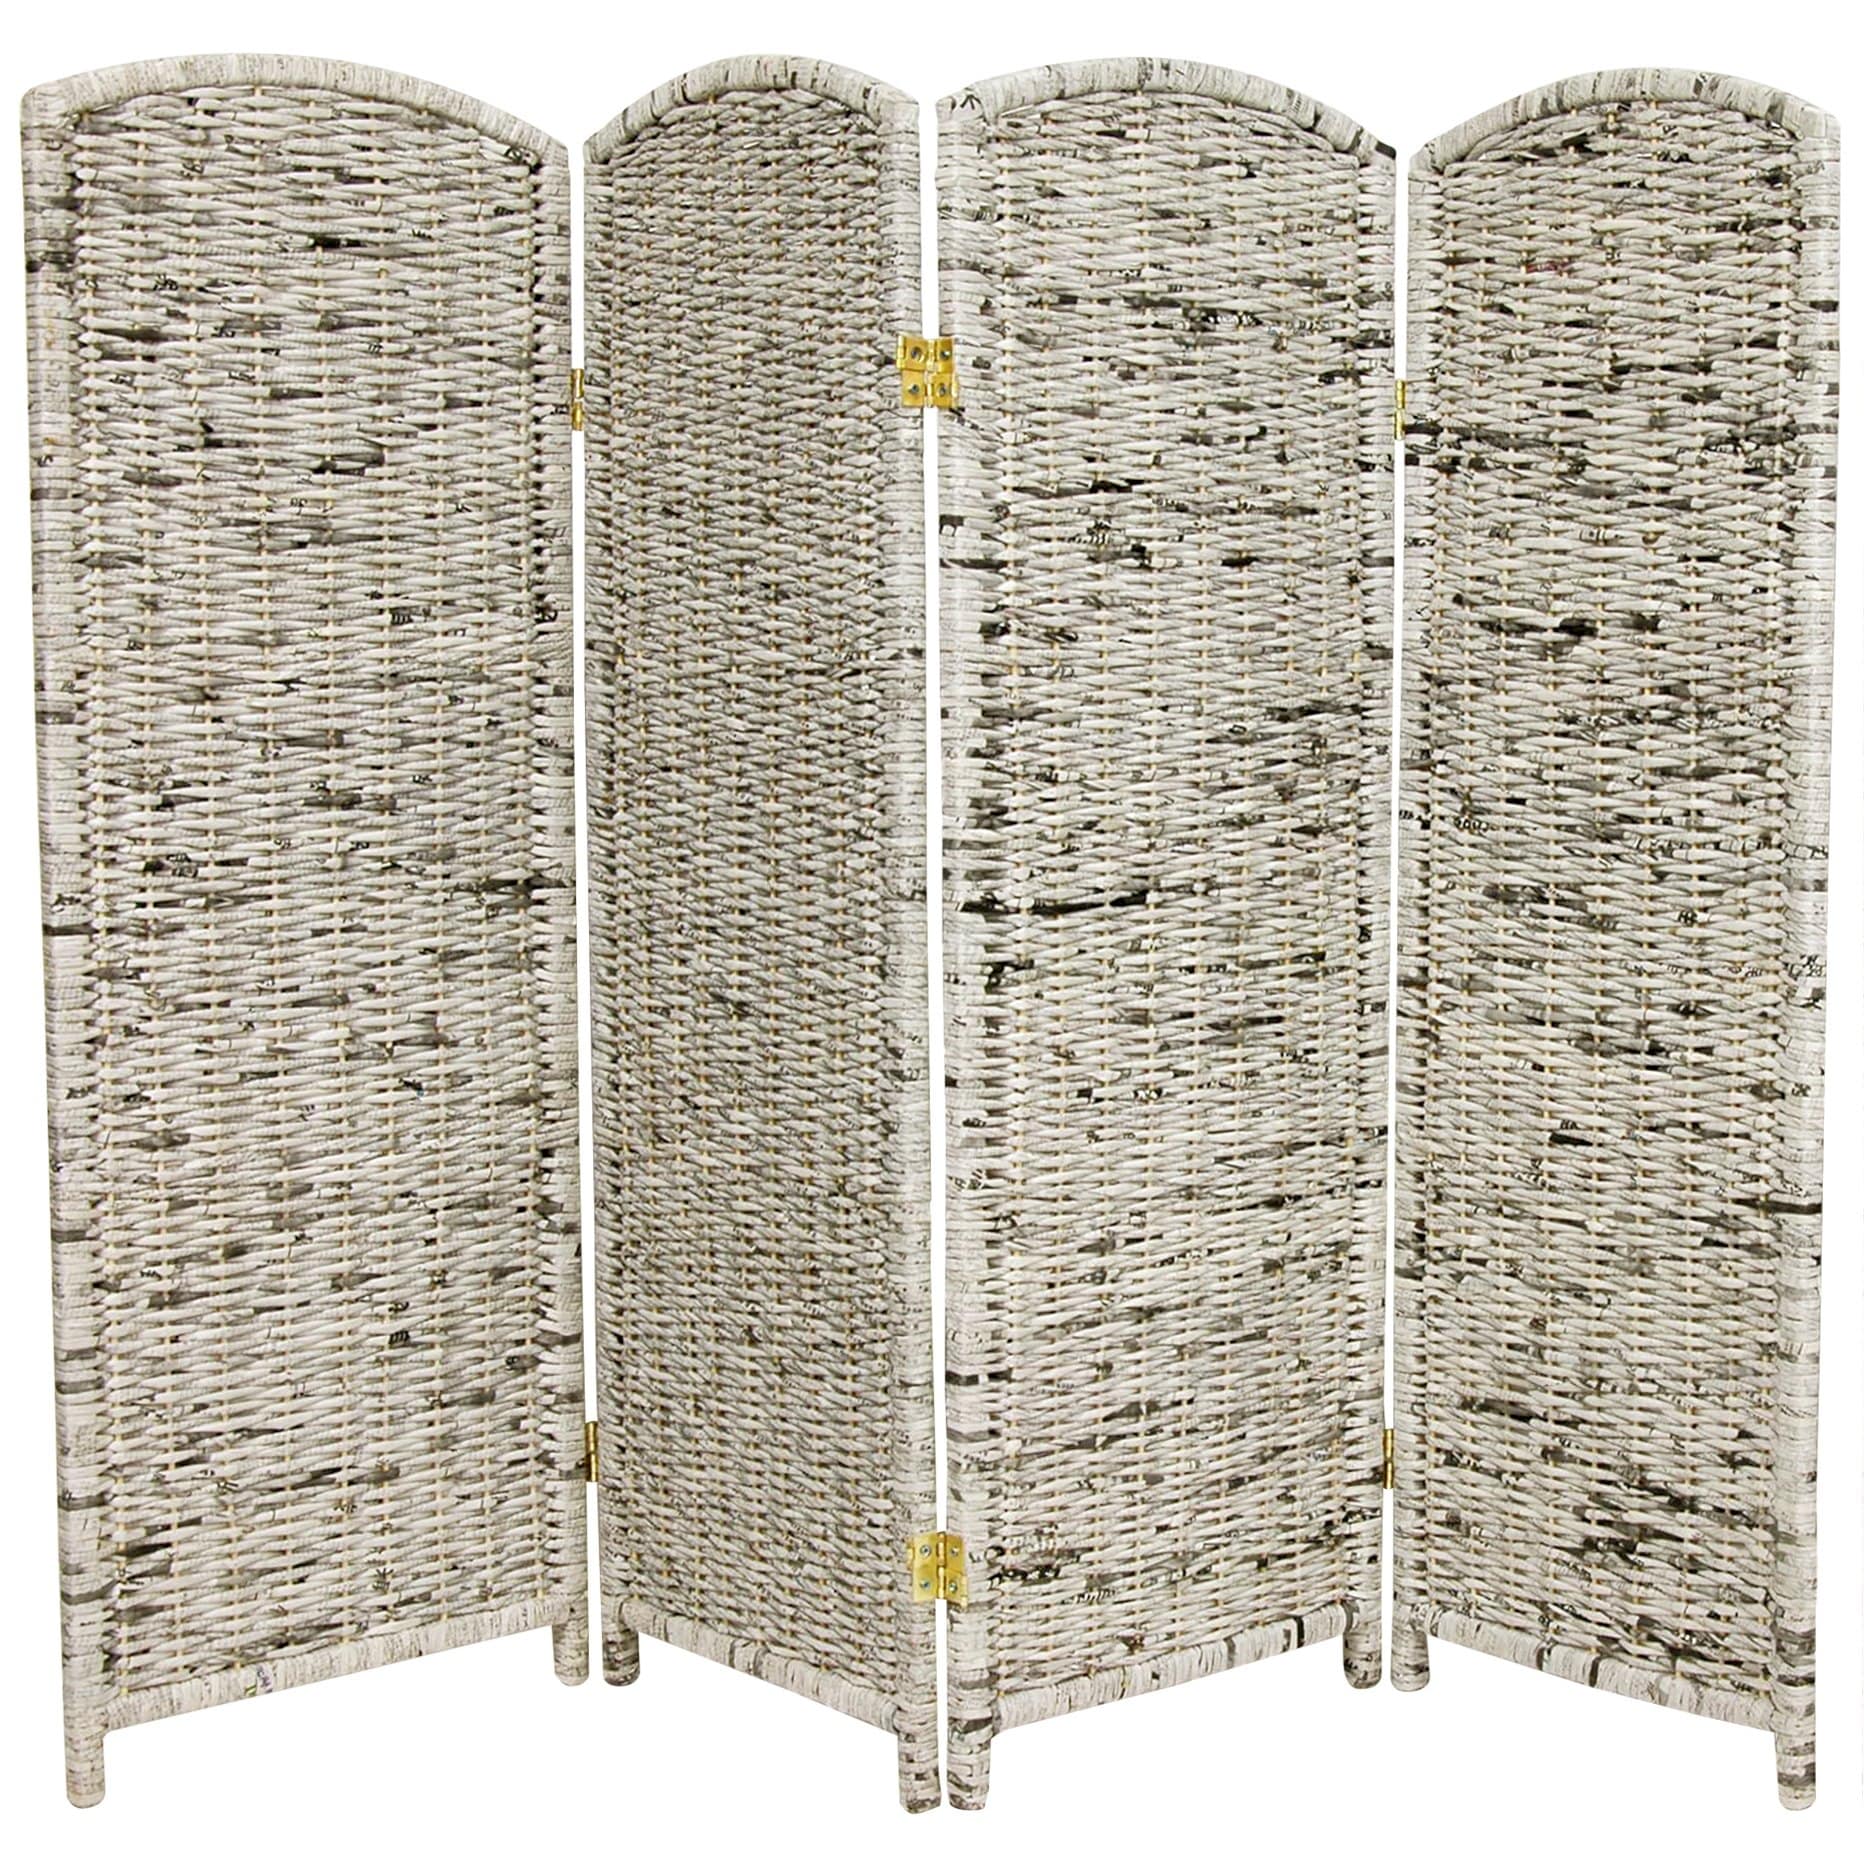 ft. Tall Recycled Newspaper Room Divider (China)